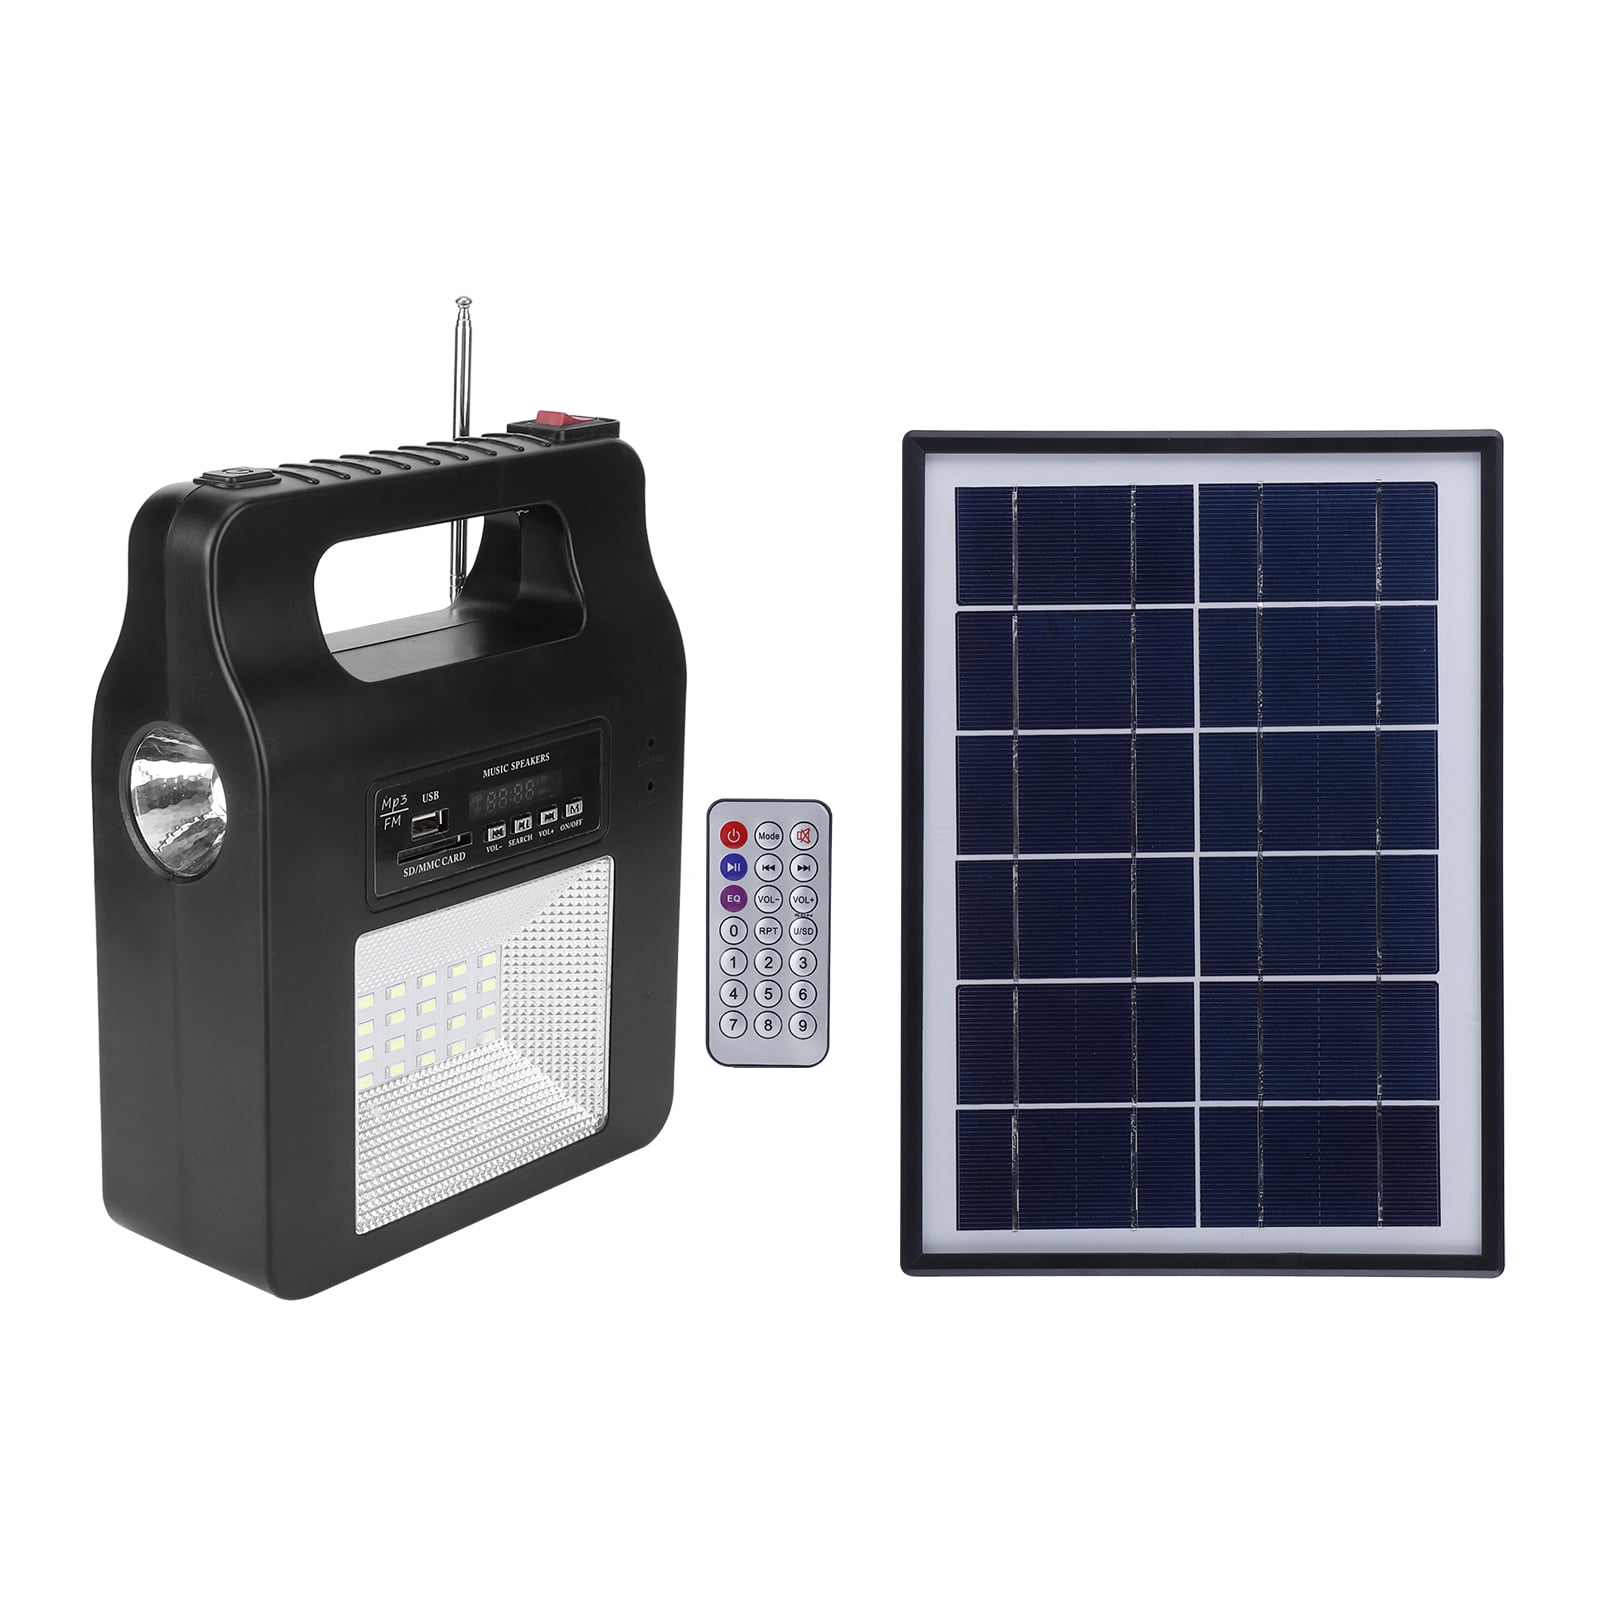 Solar Panel, Solar Generator, Charger Multi-function With Speaker Portable Convinient Solar For Indoor Outdoor Lighting Area Without Electricity - Walmart.com